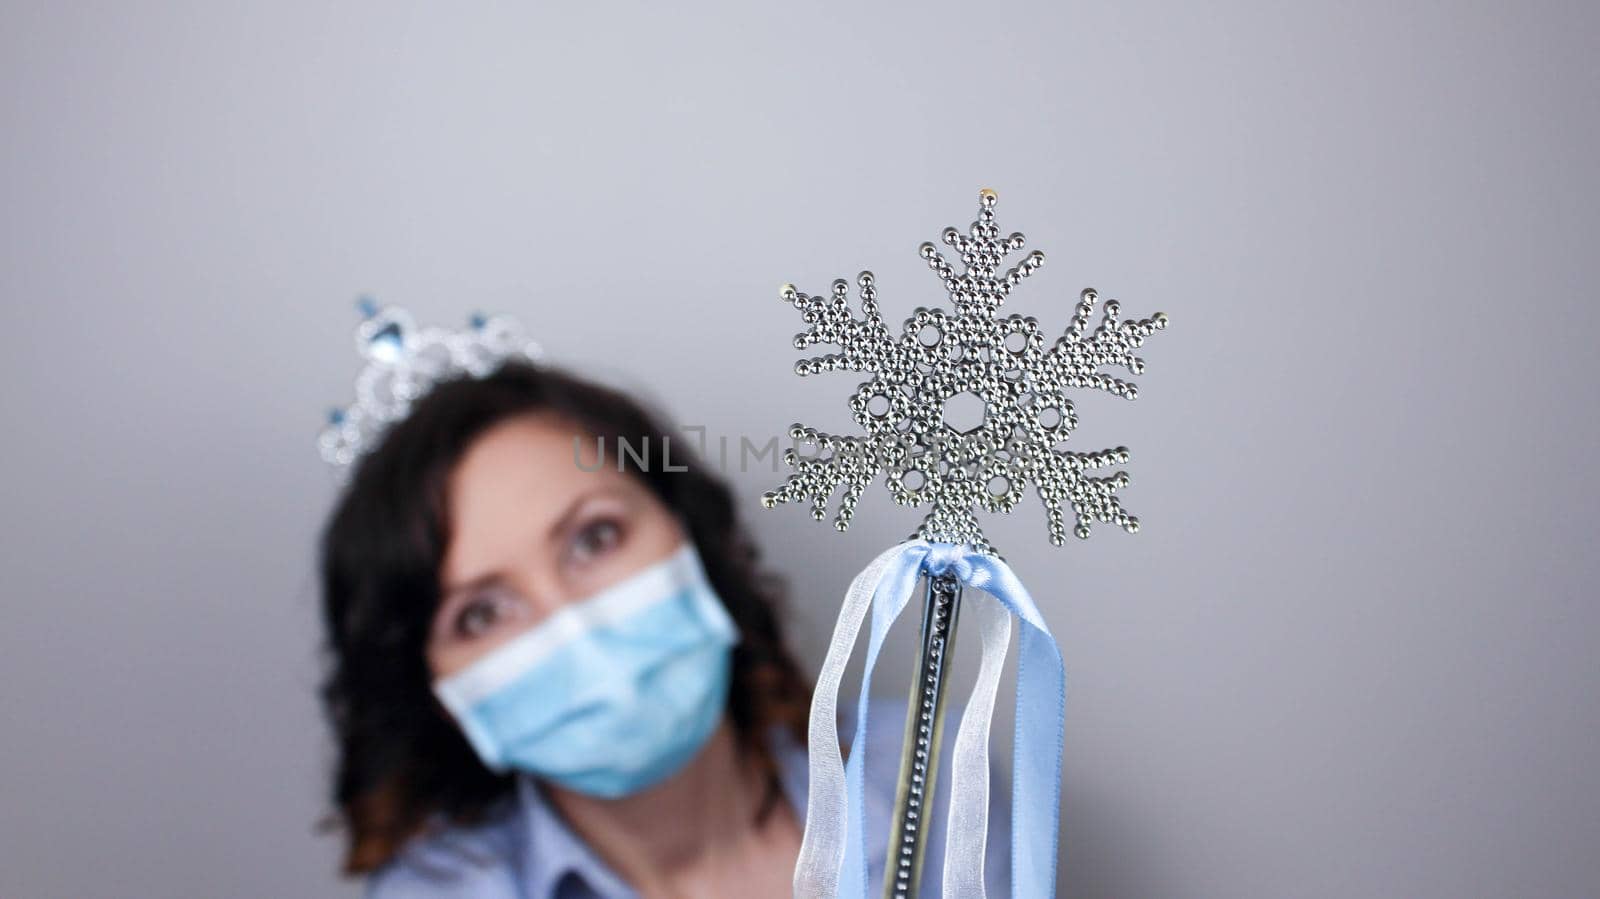 Woman wearing protection face mask against coronavirus. Woman in a mask and Christmas headband. Christmas, Halloween accessory. by JuliaDorian